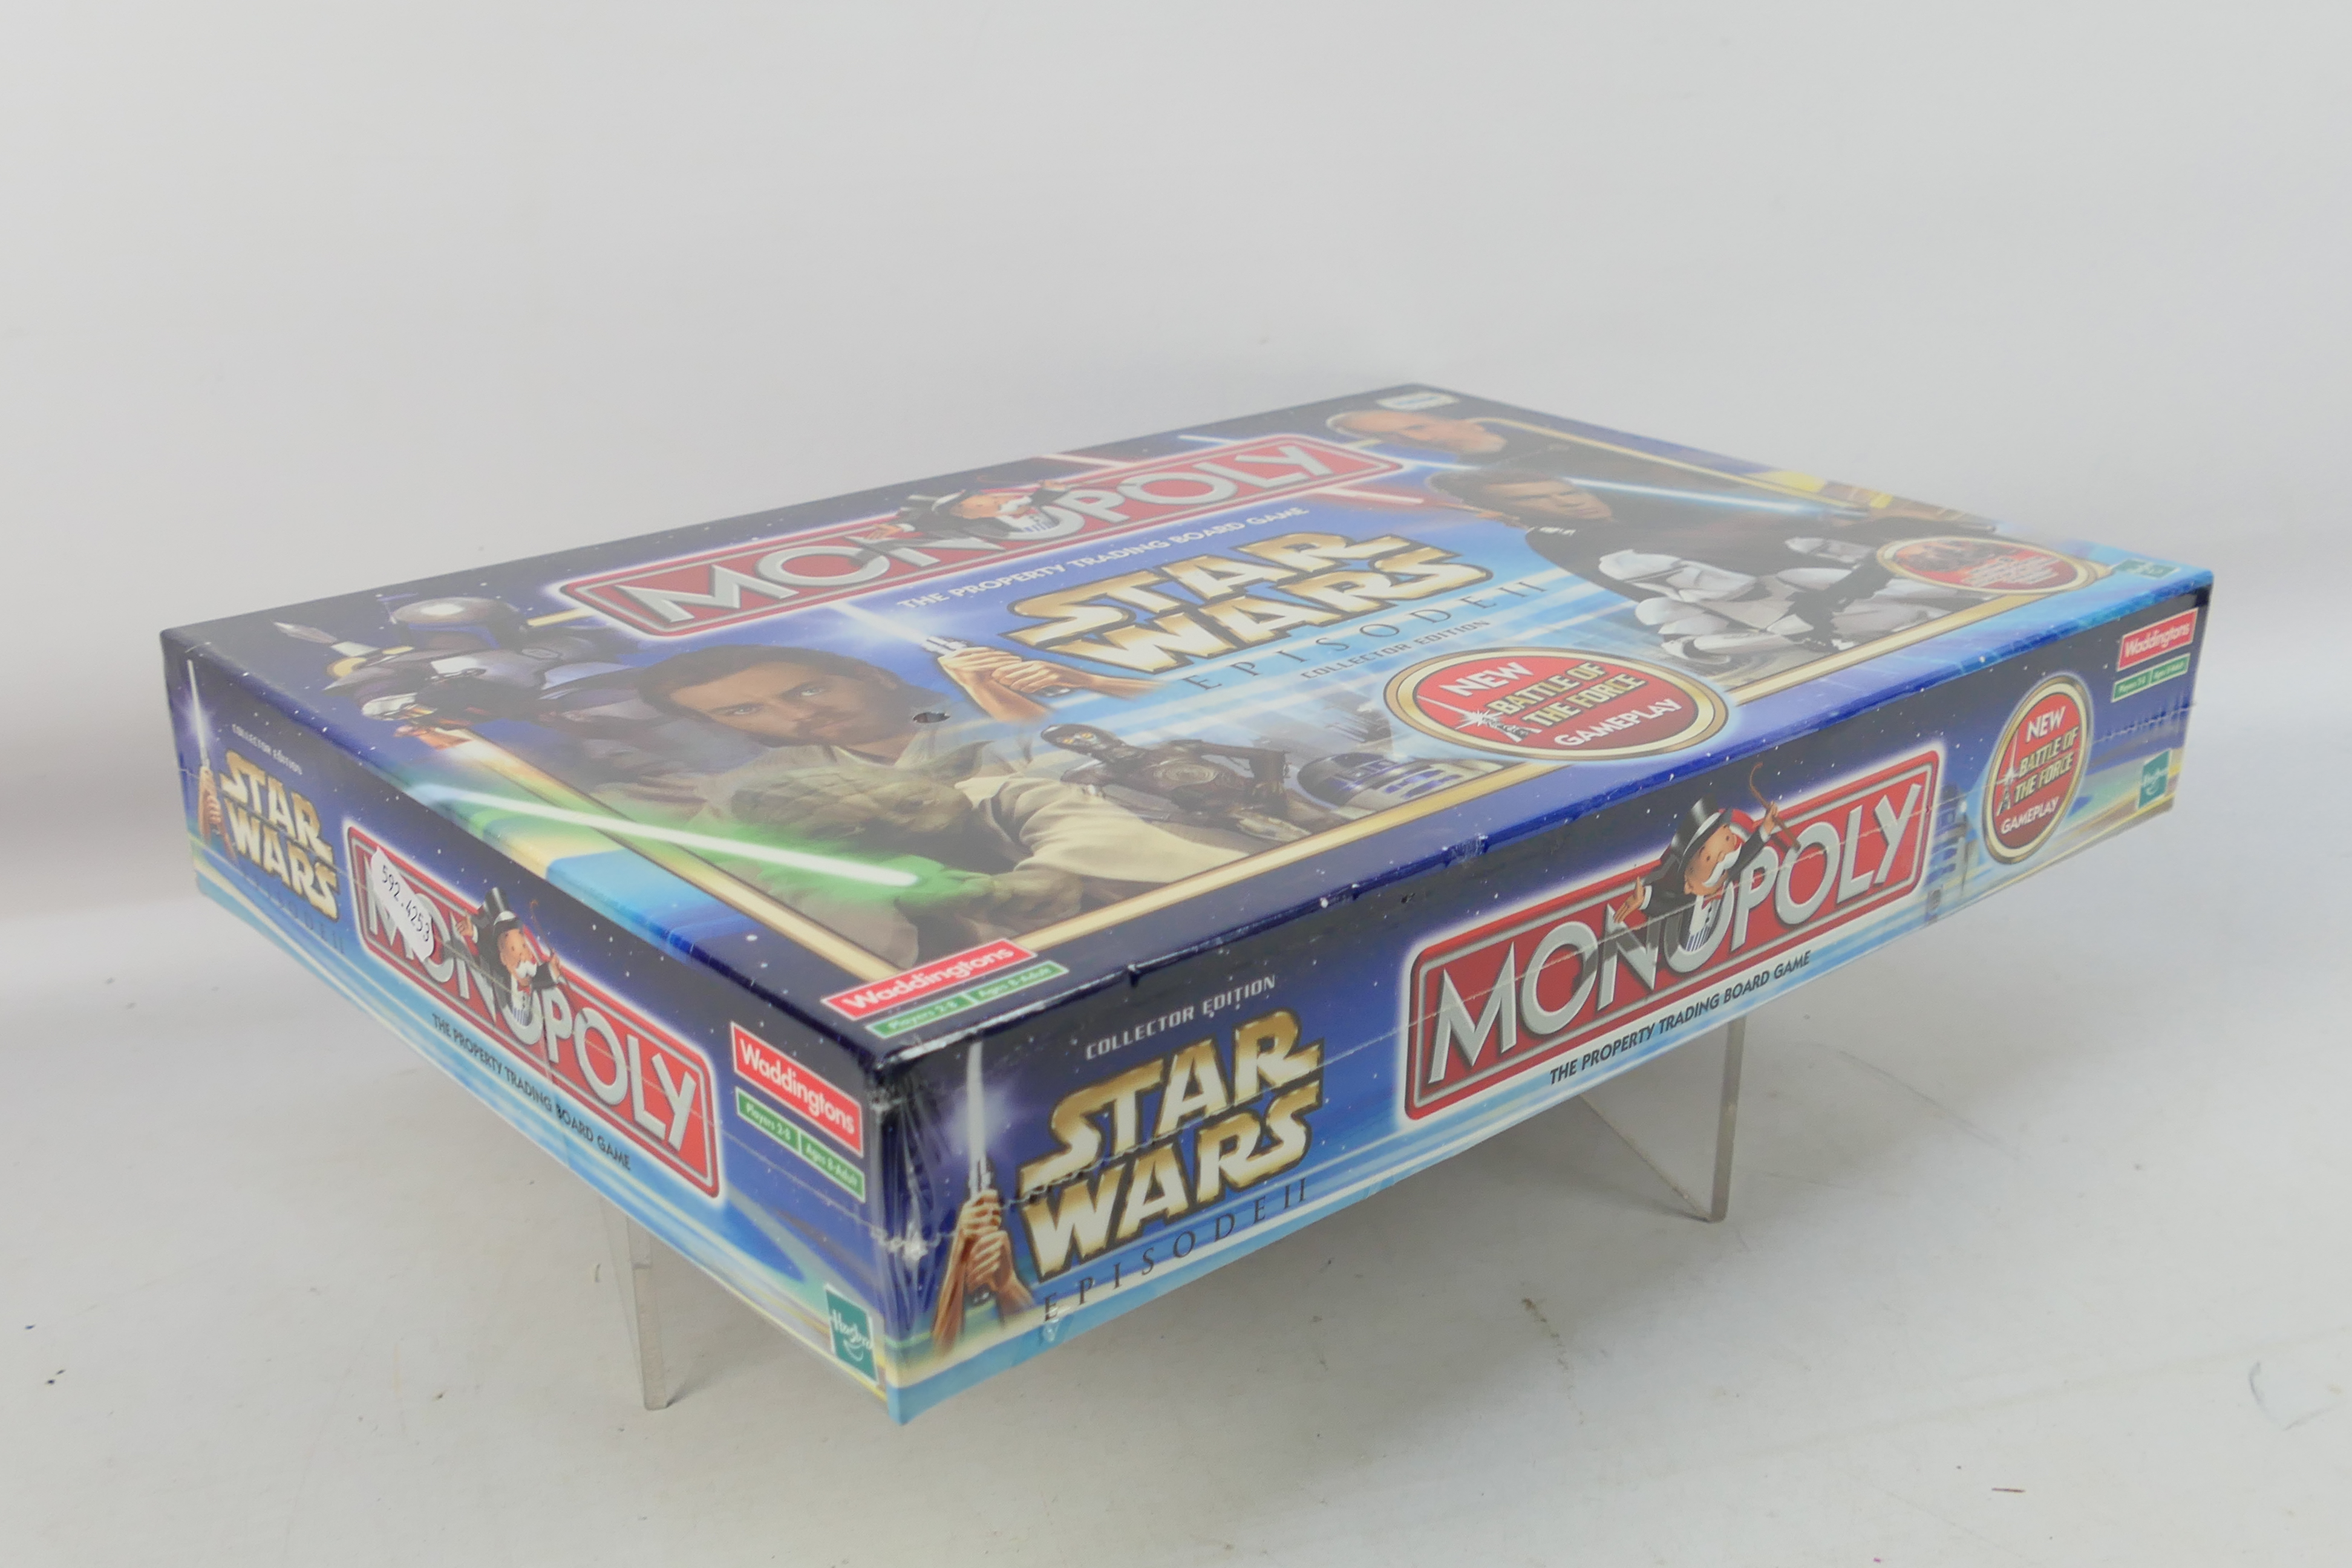 Hasbro - Monopoly - An unopened Star War - Image 3 of 3